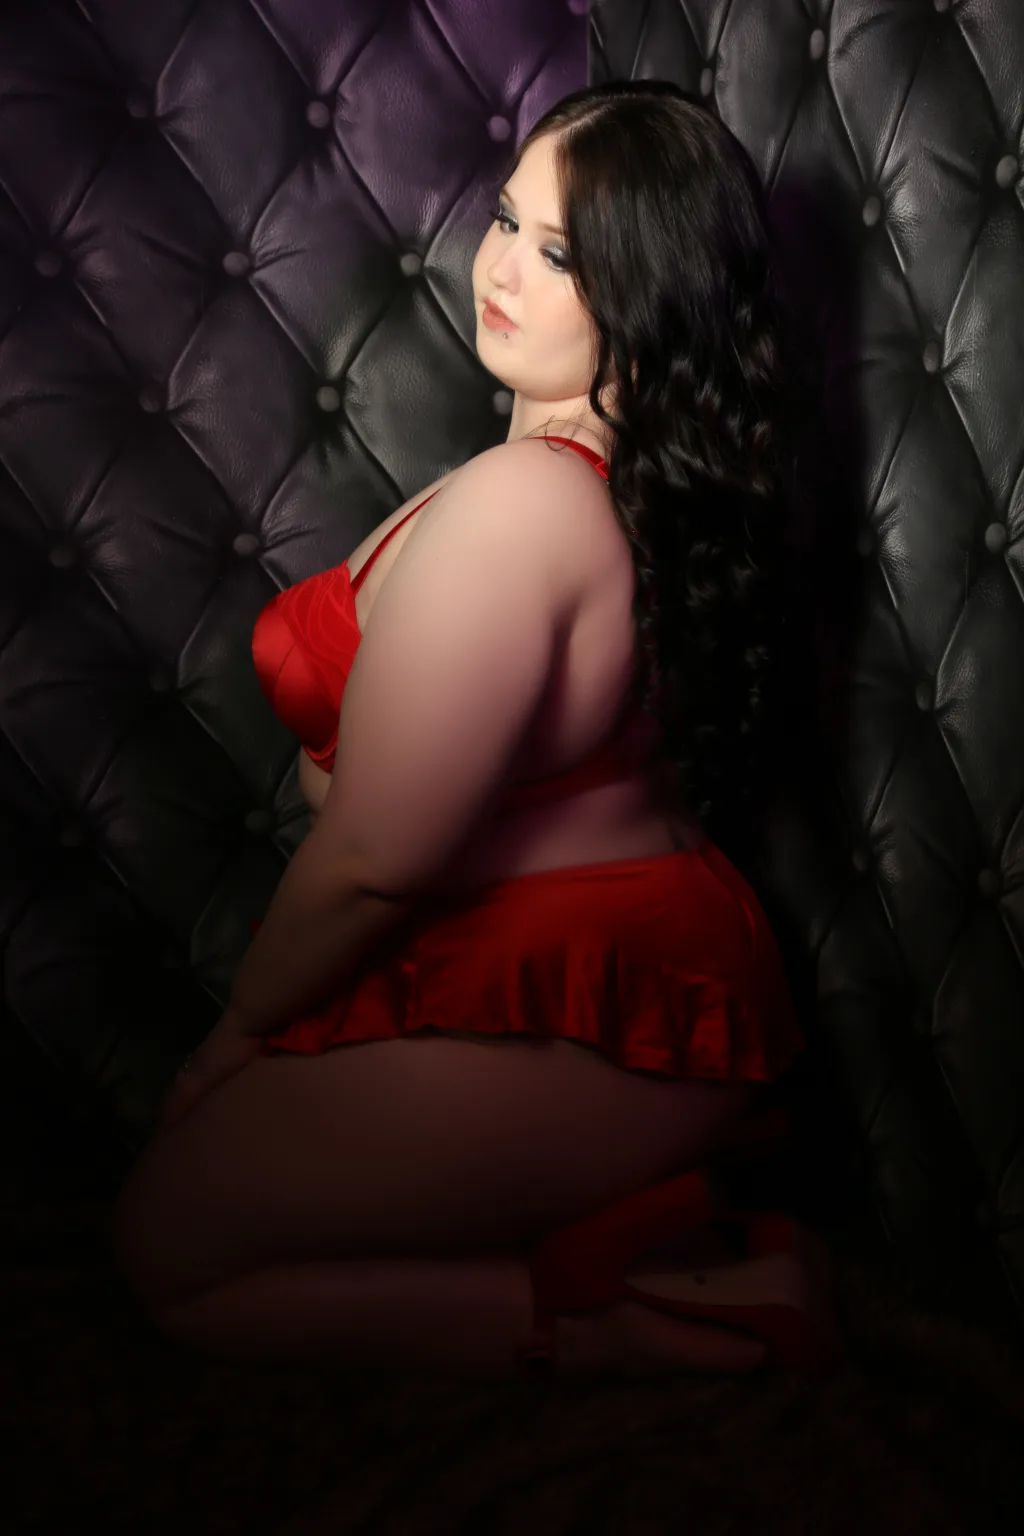 boudoir photography studio with woman in red lingerie posing on her knees looking down